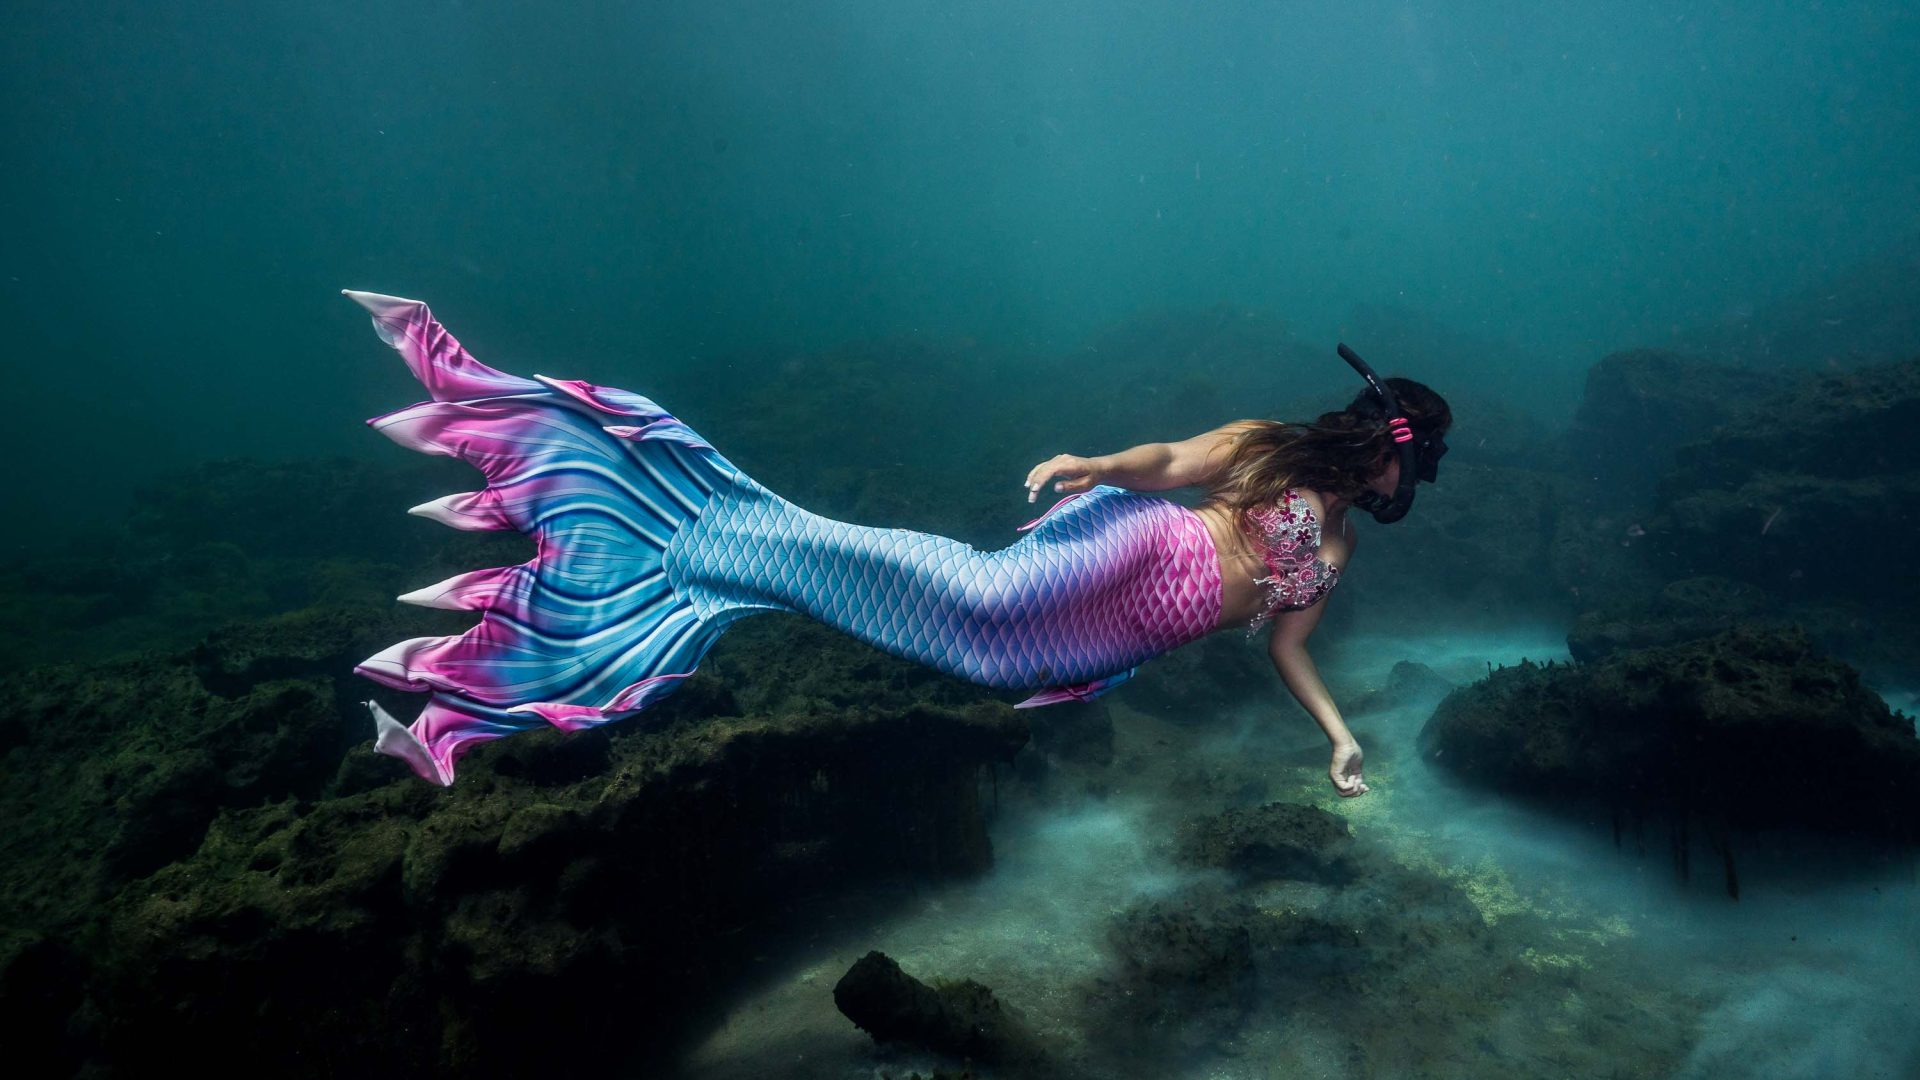 “I’m a radical woman warrior” and other notes from a real-life ‘Mermaid Camp’